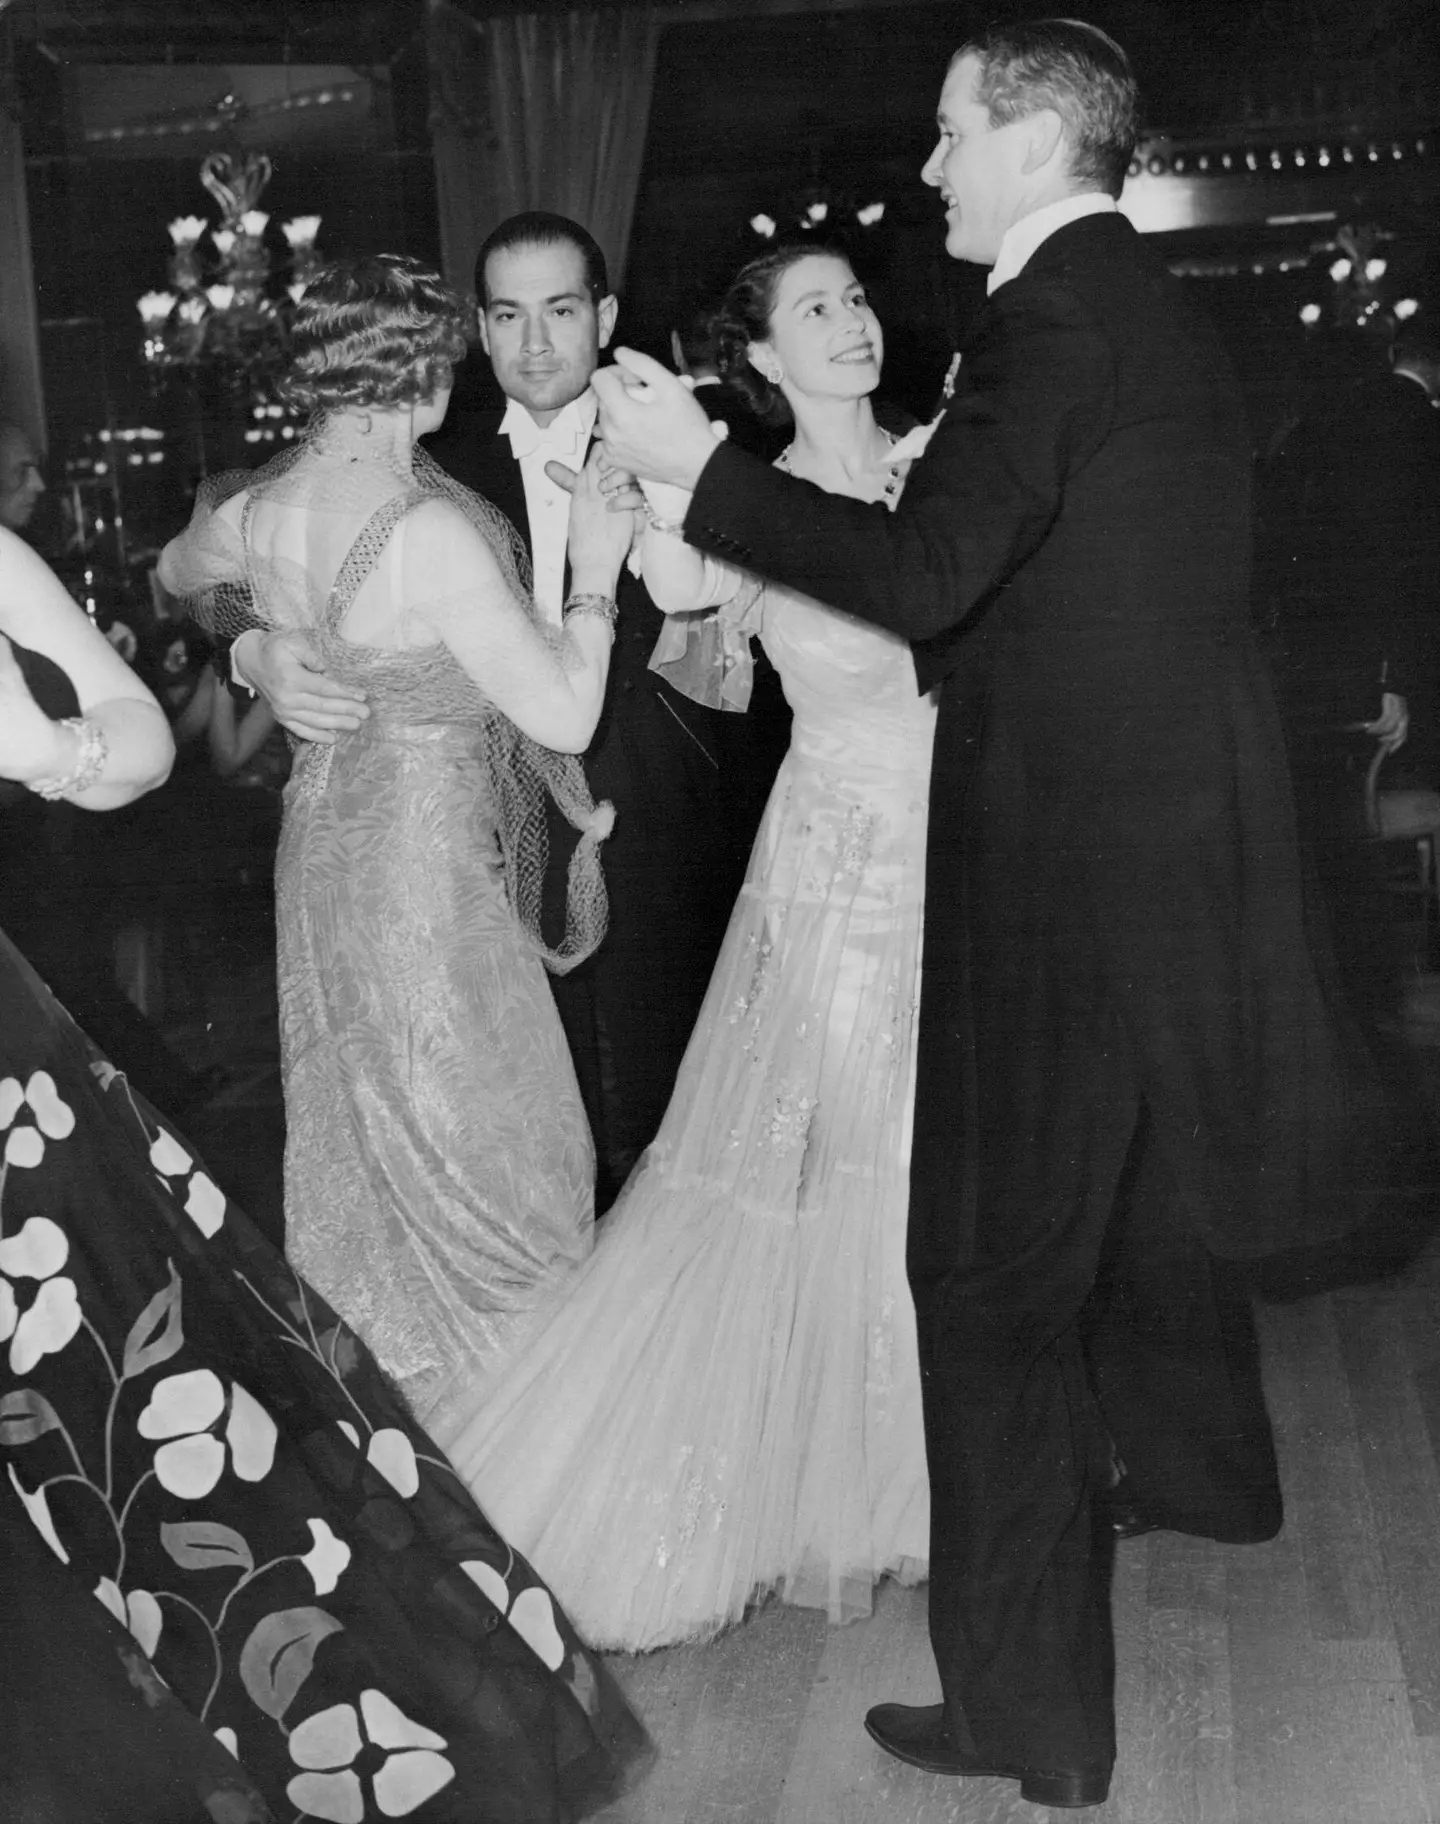 The future Queen dancing at the Dorchester Hotel in 1951.